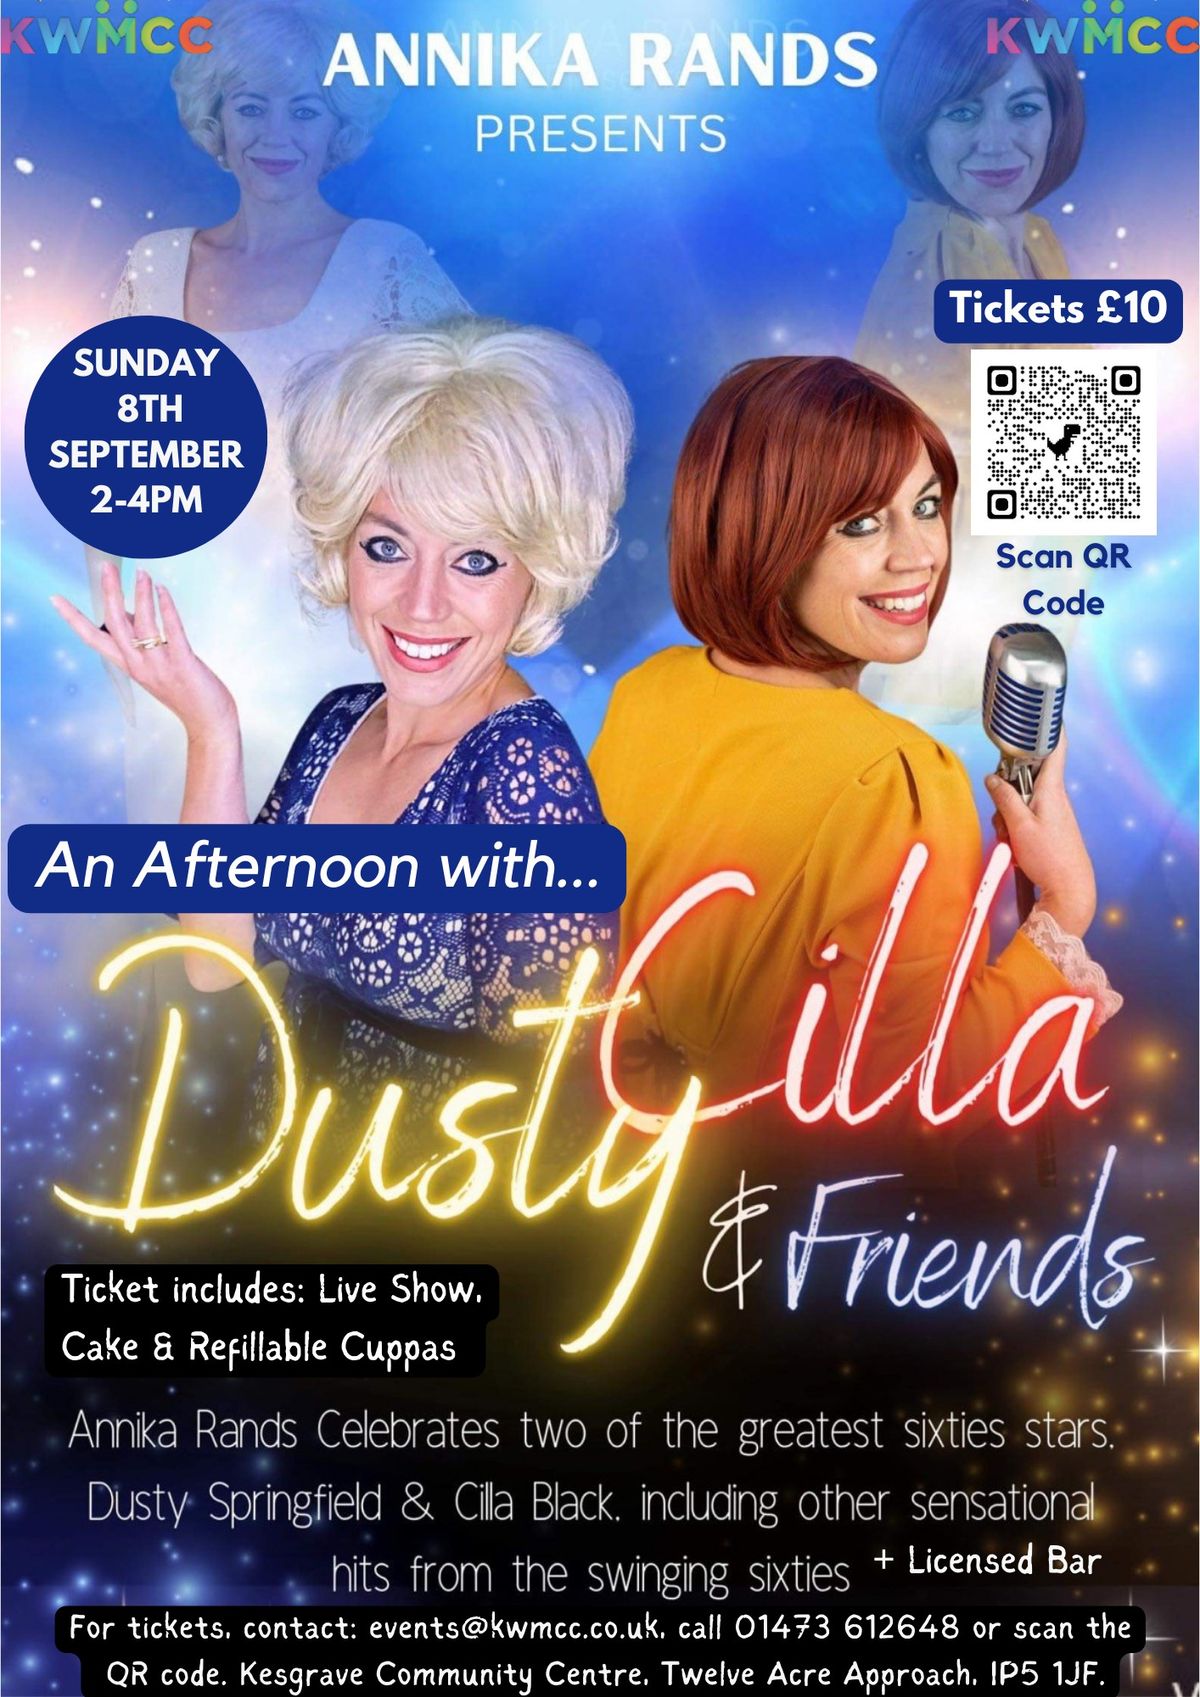 An Afternoon with Dusty, Cilla & Friends